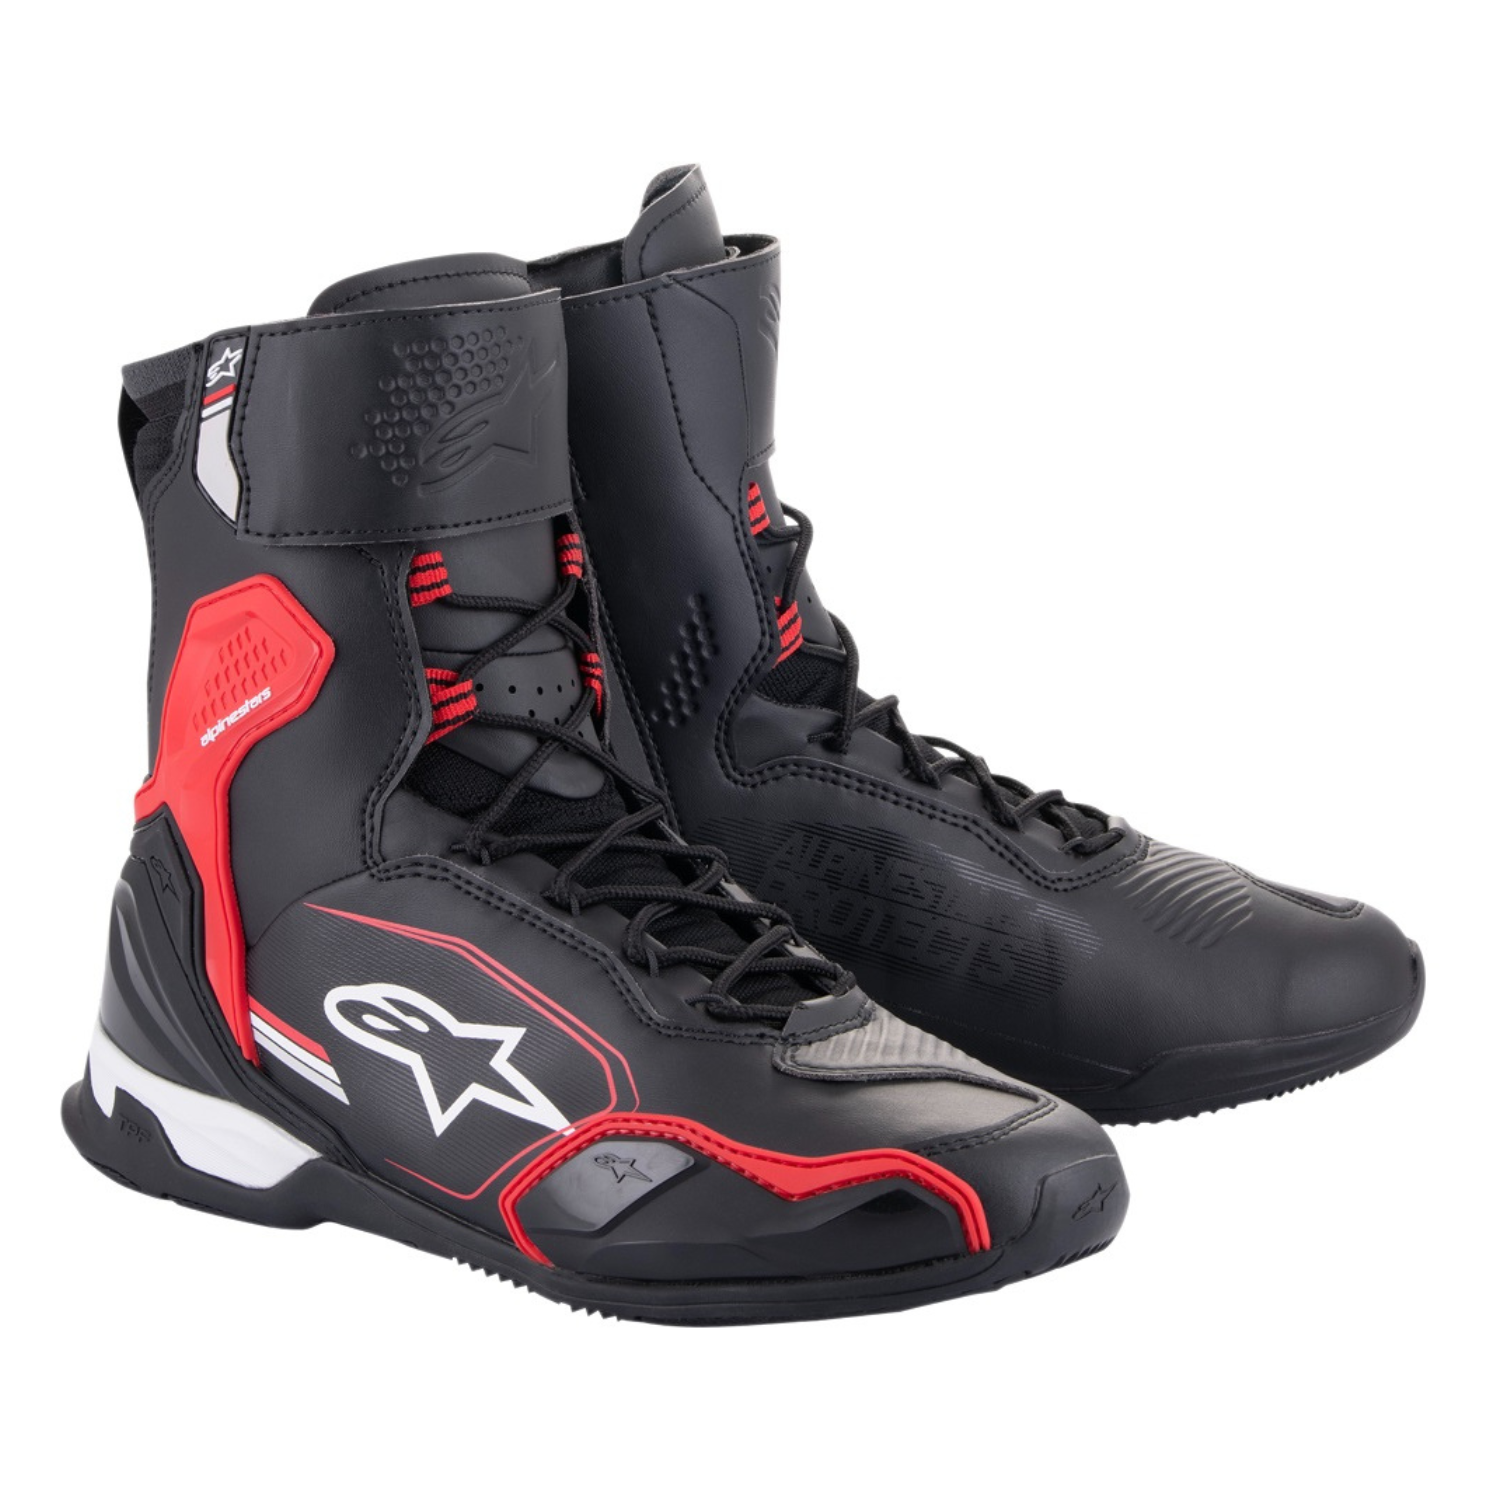 Image of Alpinestars Superfaster Shoes Black Bright Red White Taille US 115